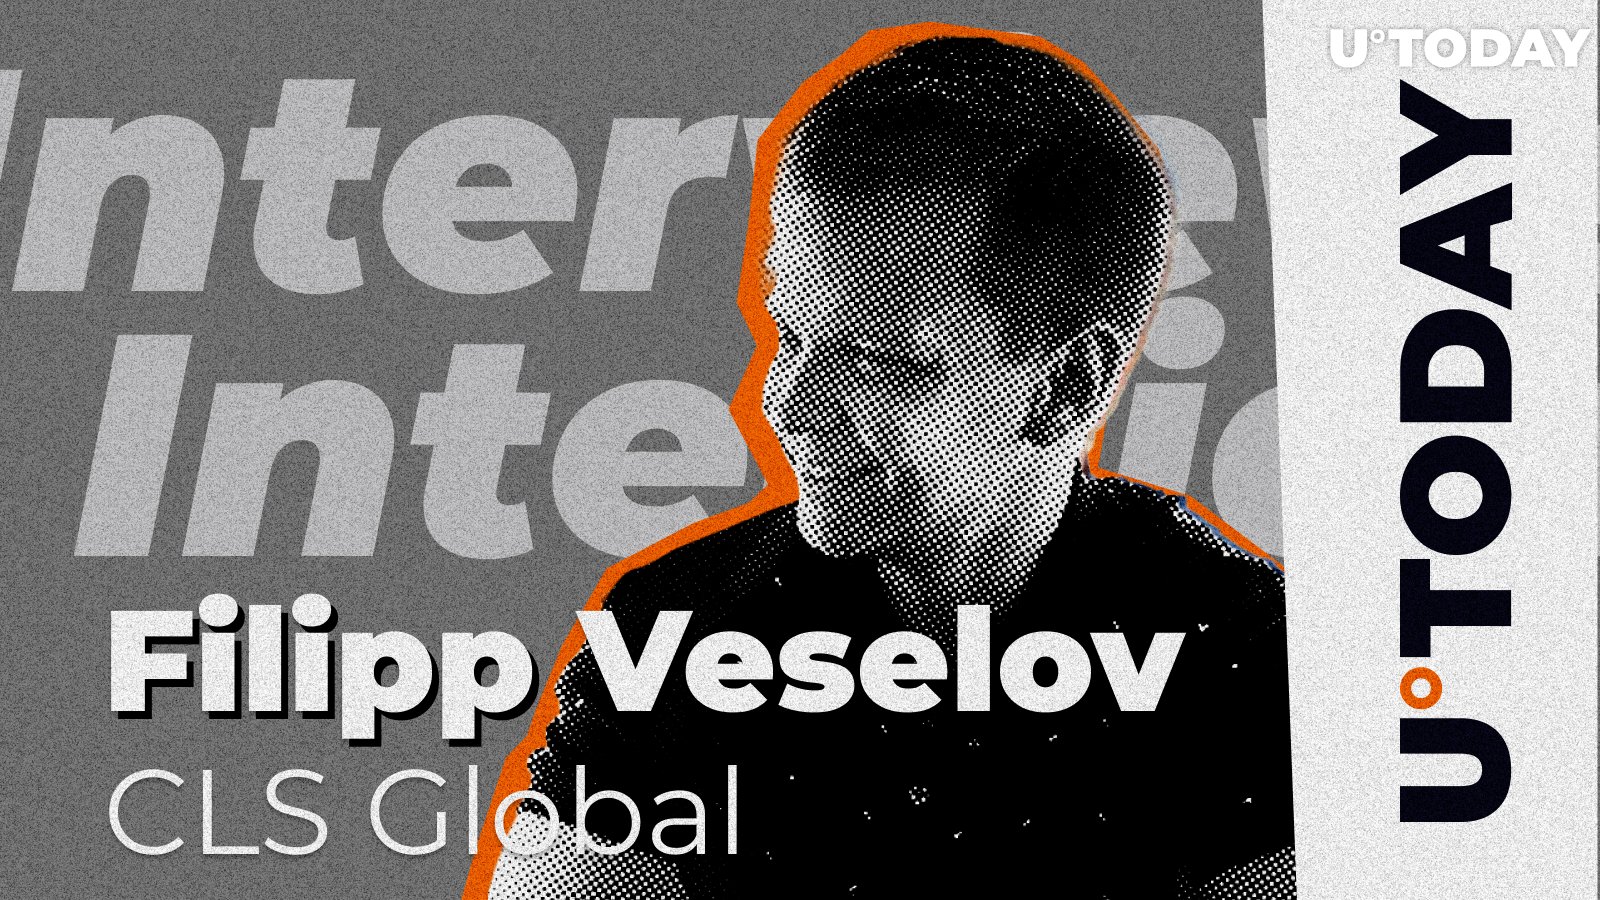 $1.5 Billion in AUM, Major Trends for 2024-2025 and Market-Making Across Three Bull Runs: Interview With CLS Global CEO Filipp Veselov